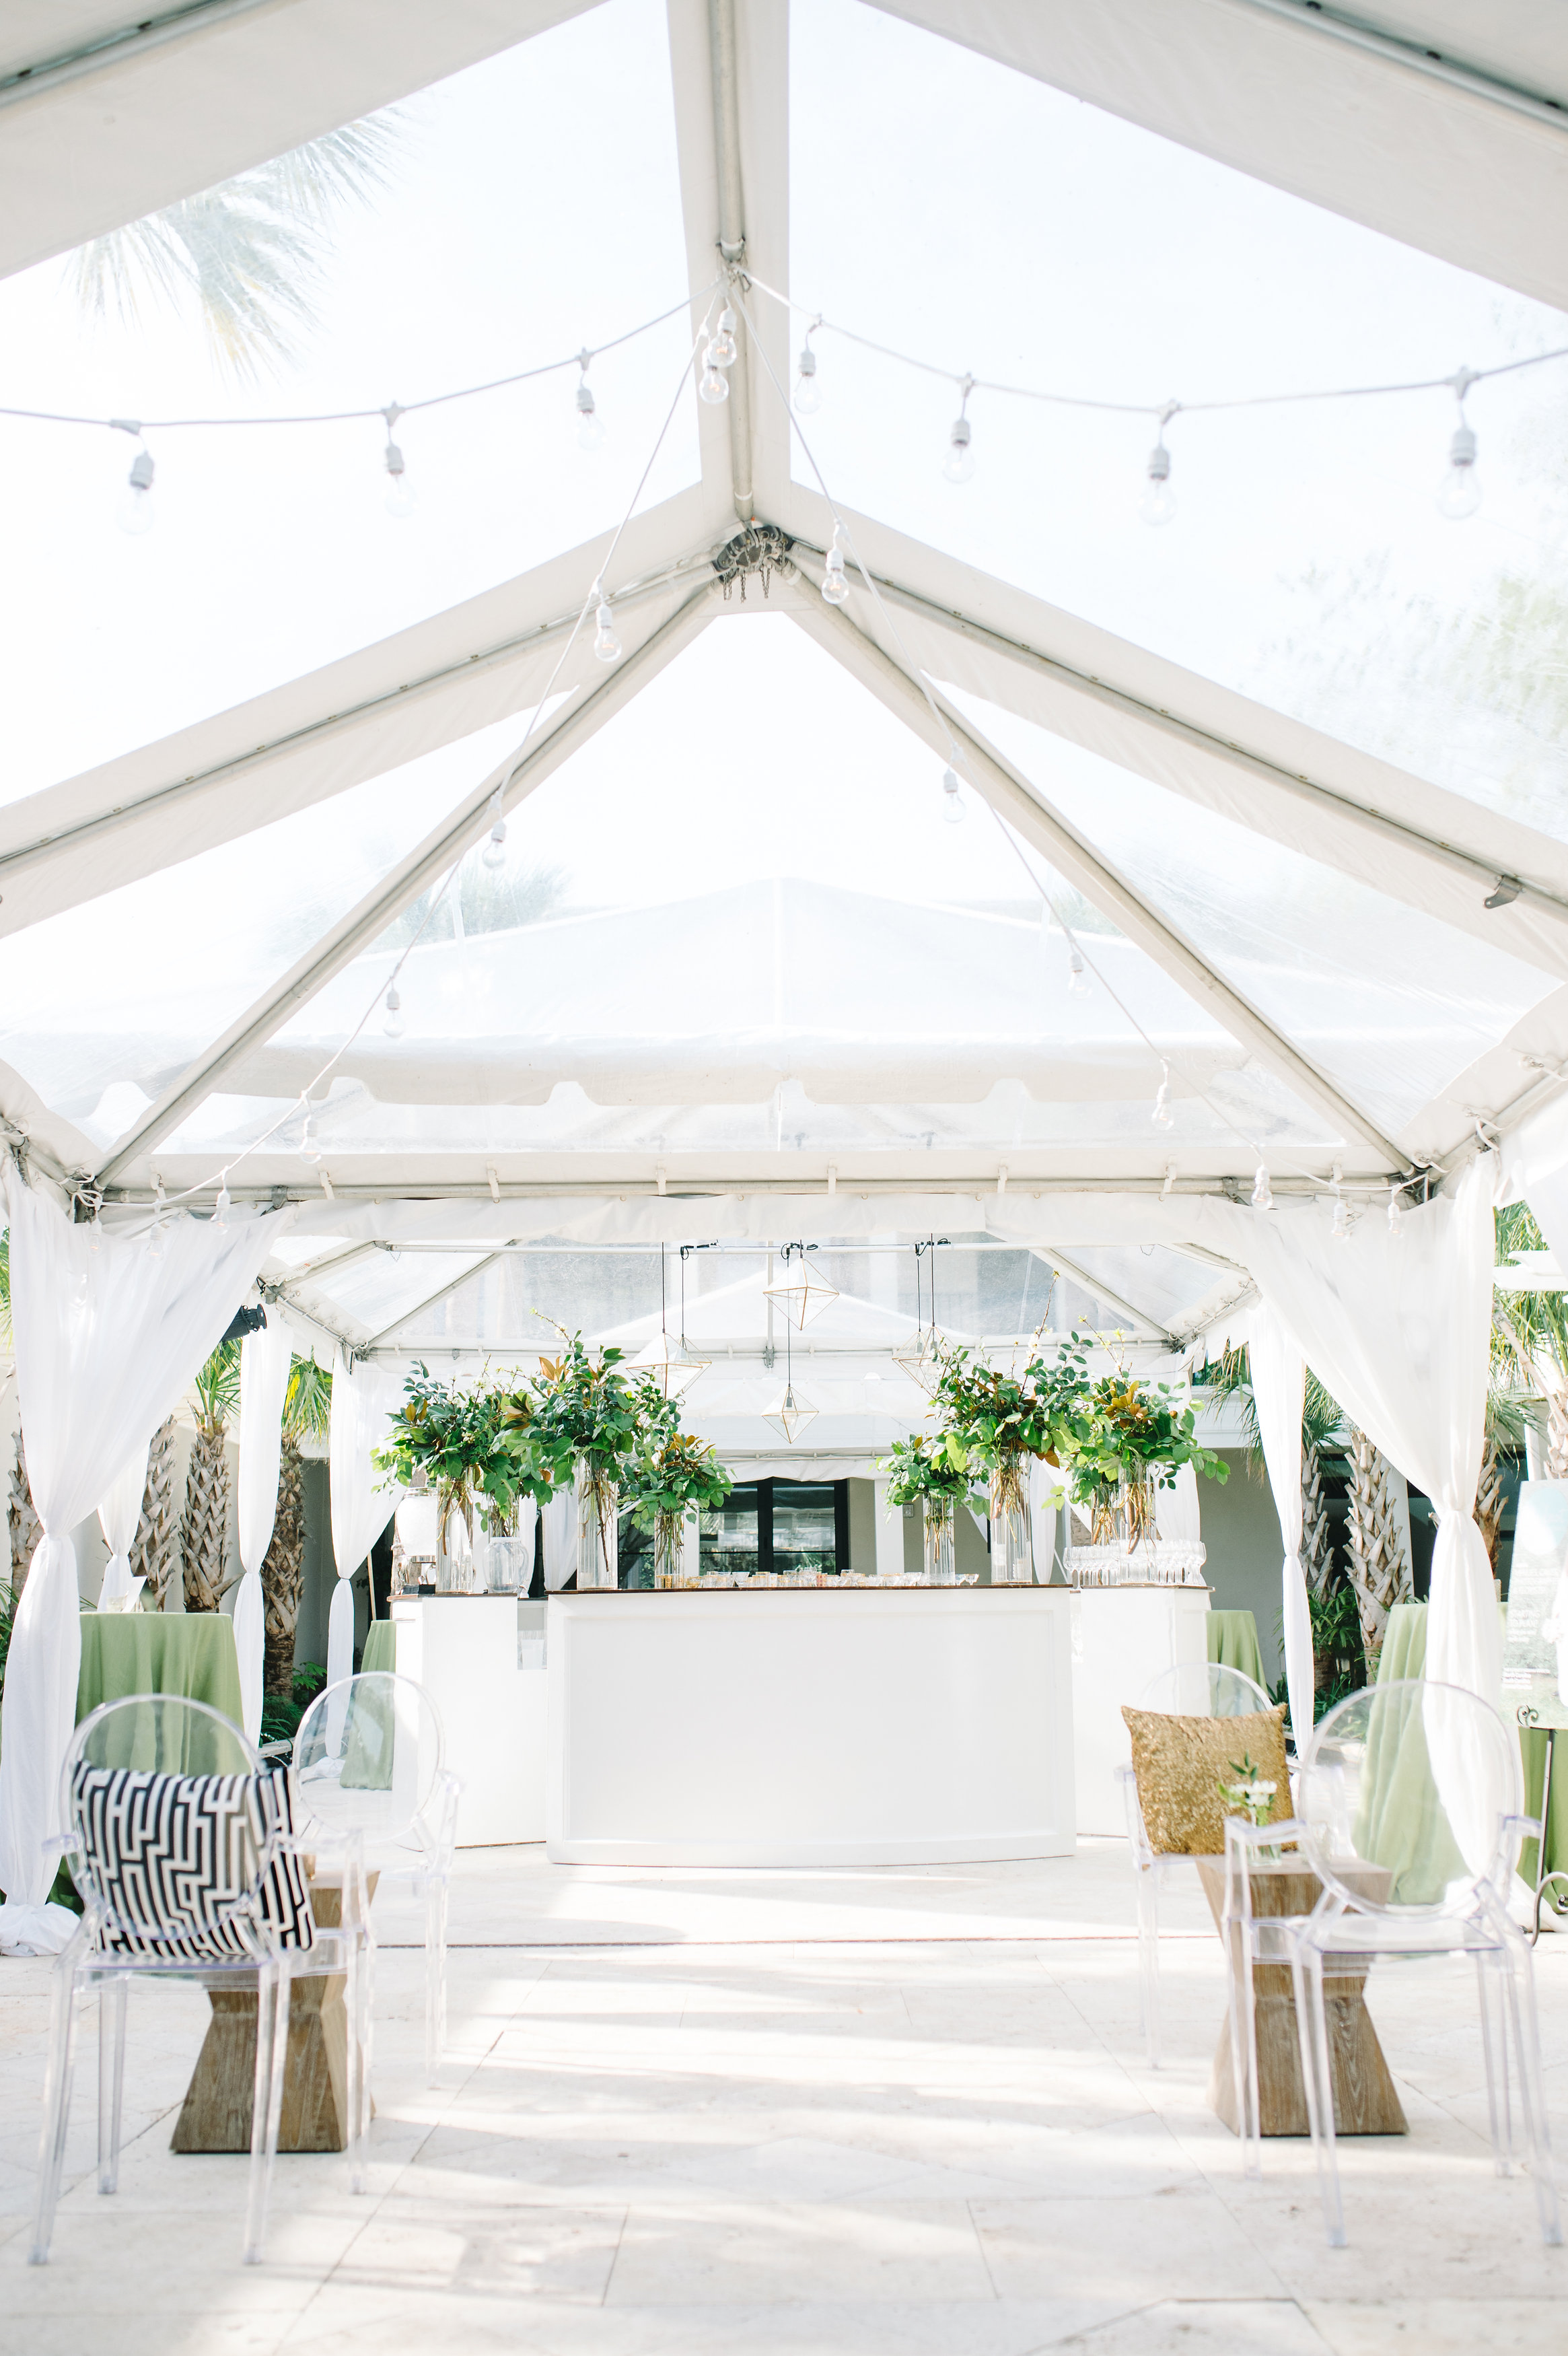 sperry-tents-charleston-clear-tent-cannon-green-charleston-event-venue-and-catering-west-elm-event-furnishings